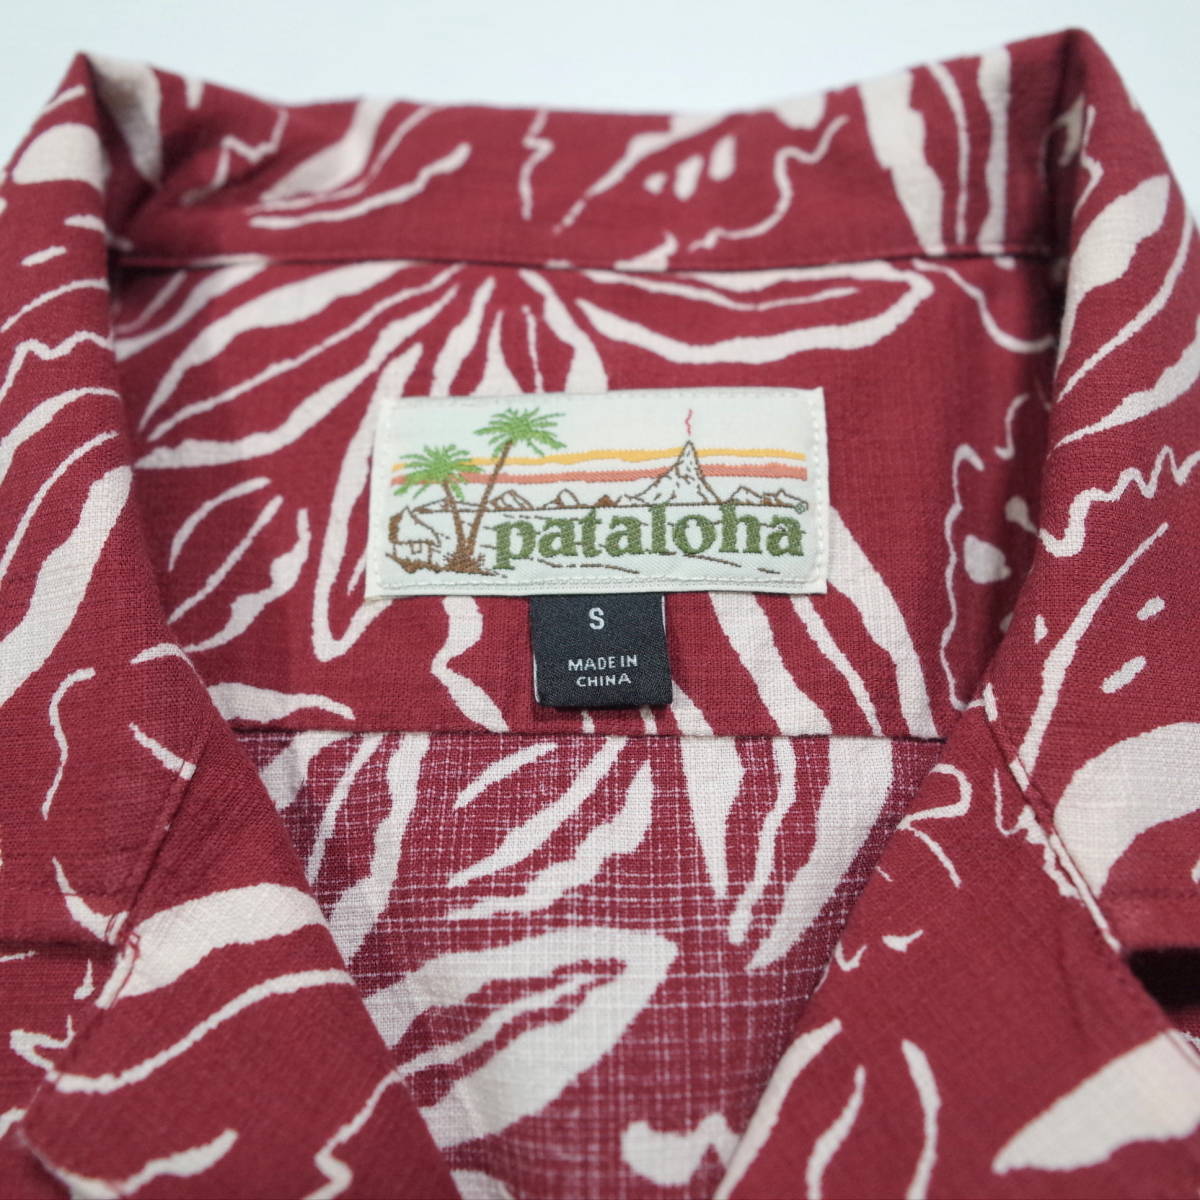 Patagonia pataloha パタロハシャツ アロハシャツ ３０周年記念 限定 パタゴニア LIMITED EDITION EXCLUSIVE 美品 Red size:S